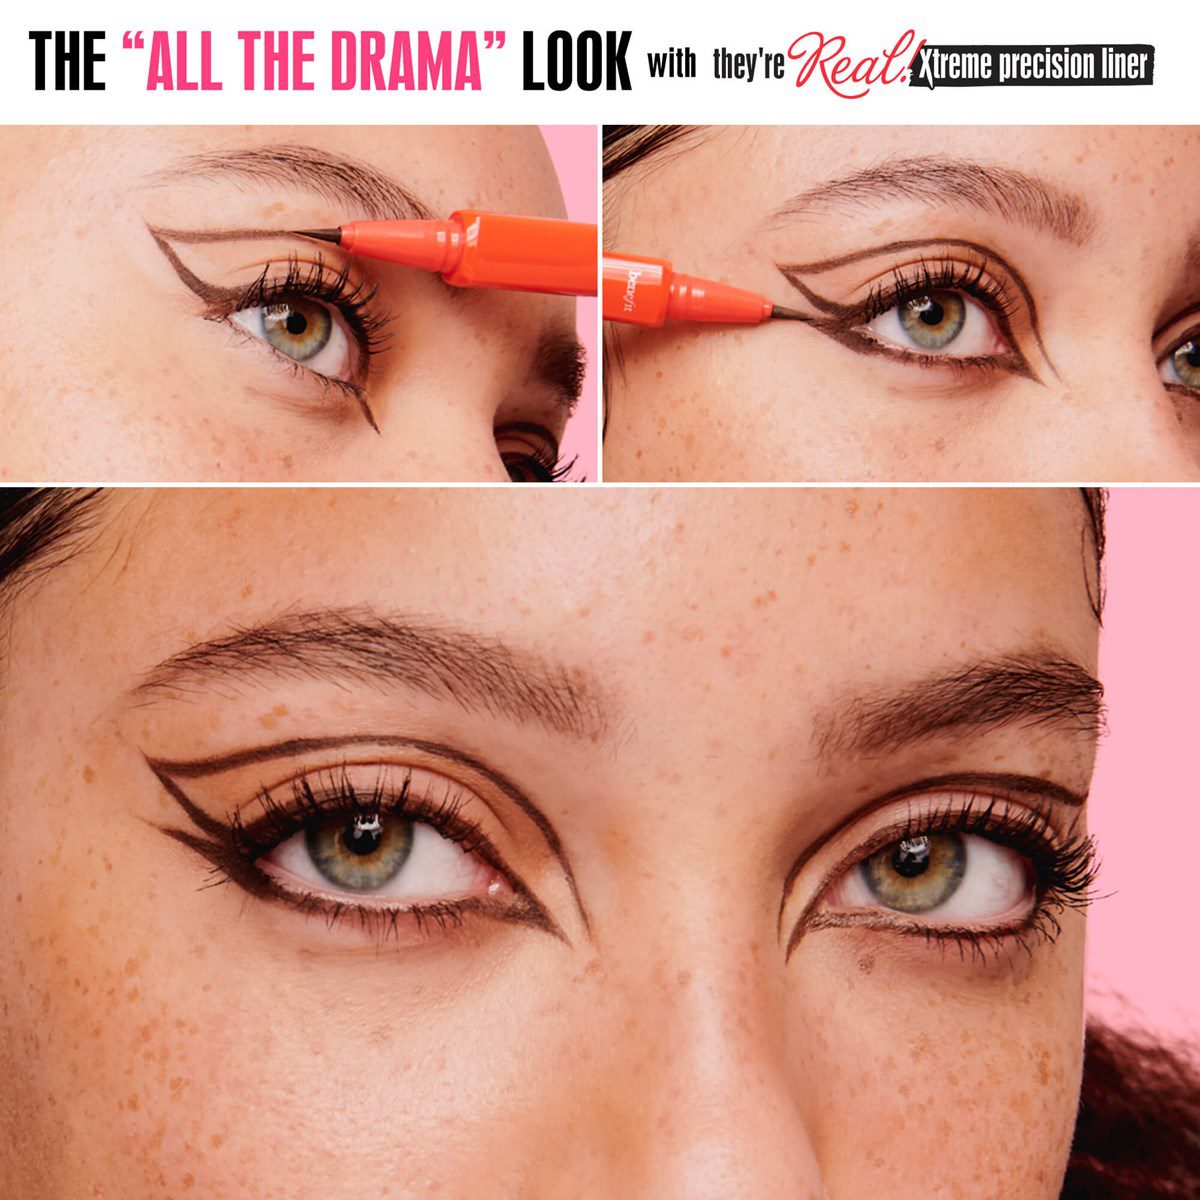 et_2022eye_theyrerealxtremeprecisionliner_brown_productapplicationinfographic_allthedrama-1